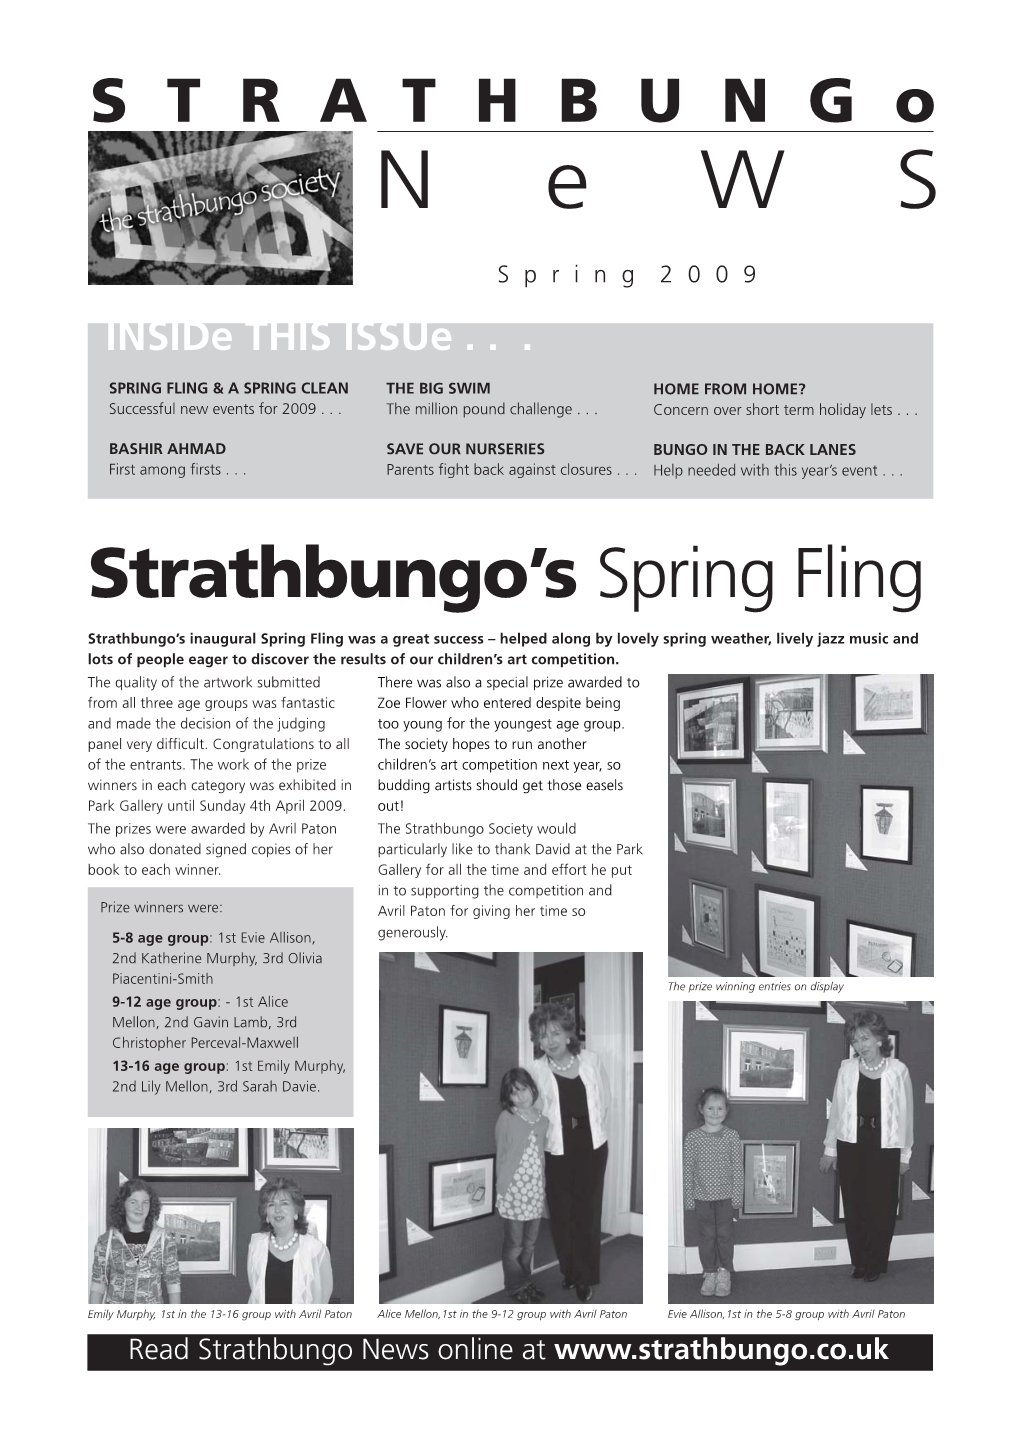 Read the Strathbungo News for Spring 2009